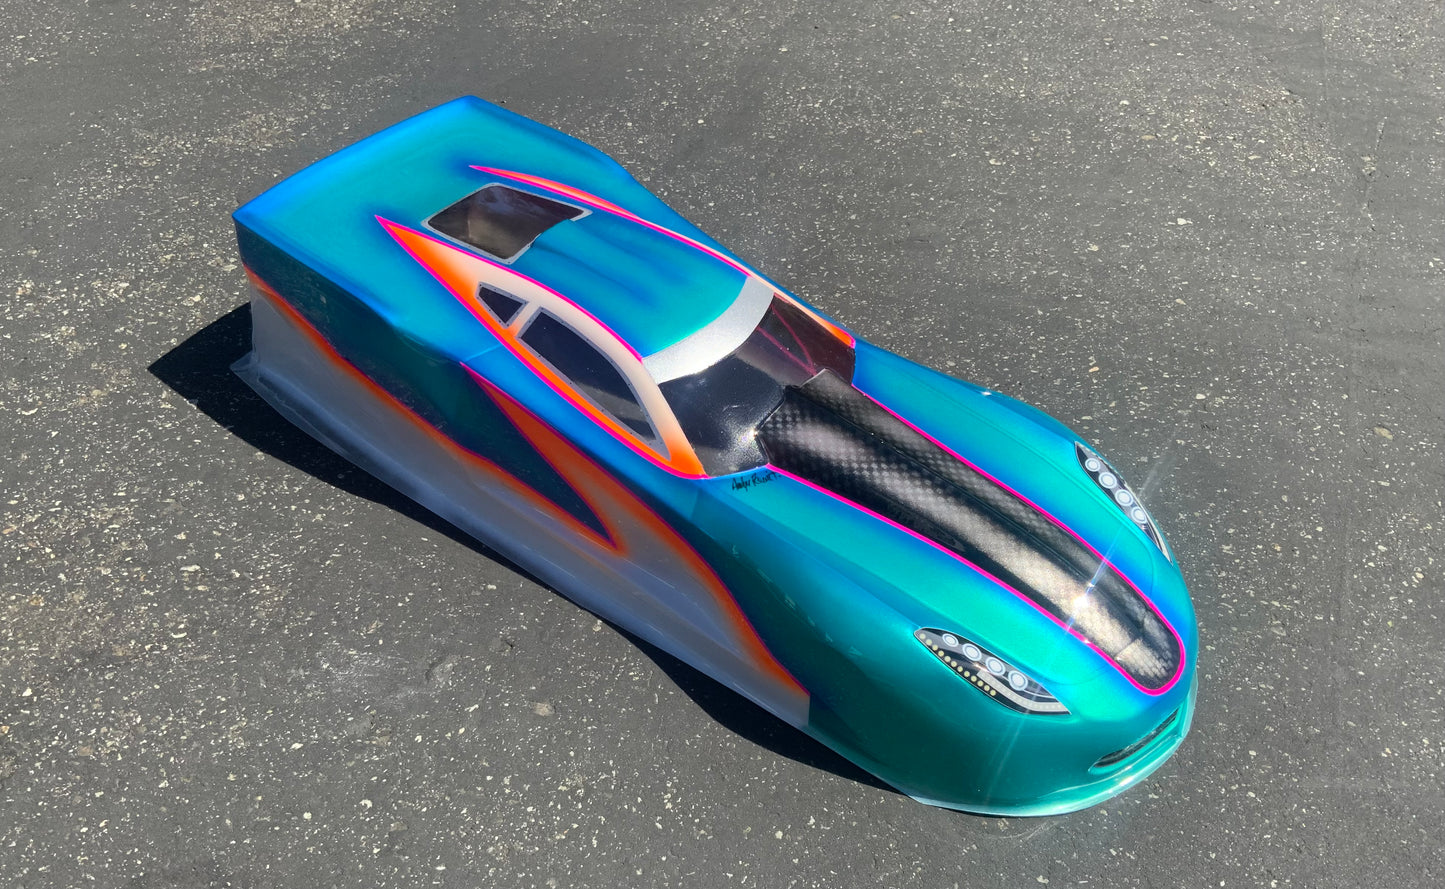 Racer RC by Andy’s RC LS23N (Narrow) with protective film